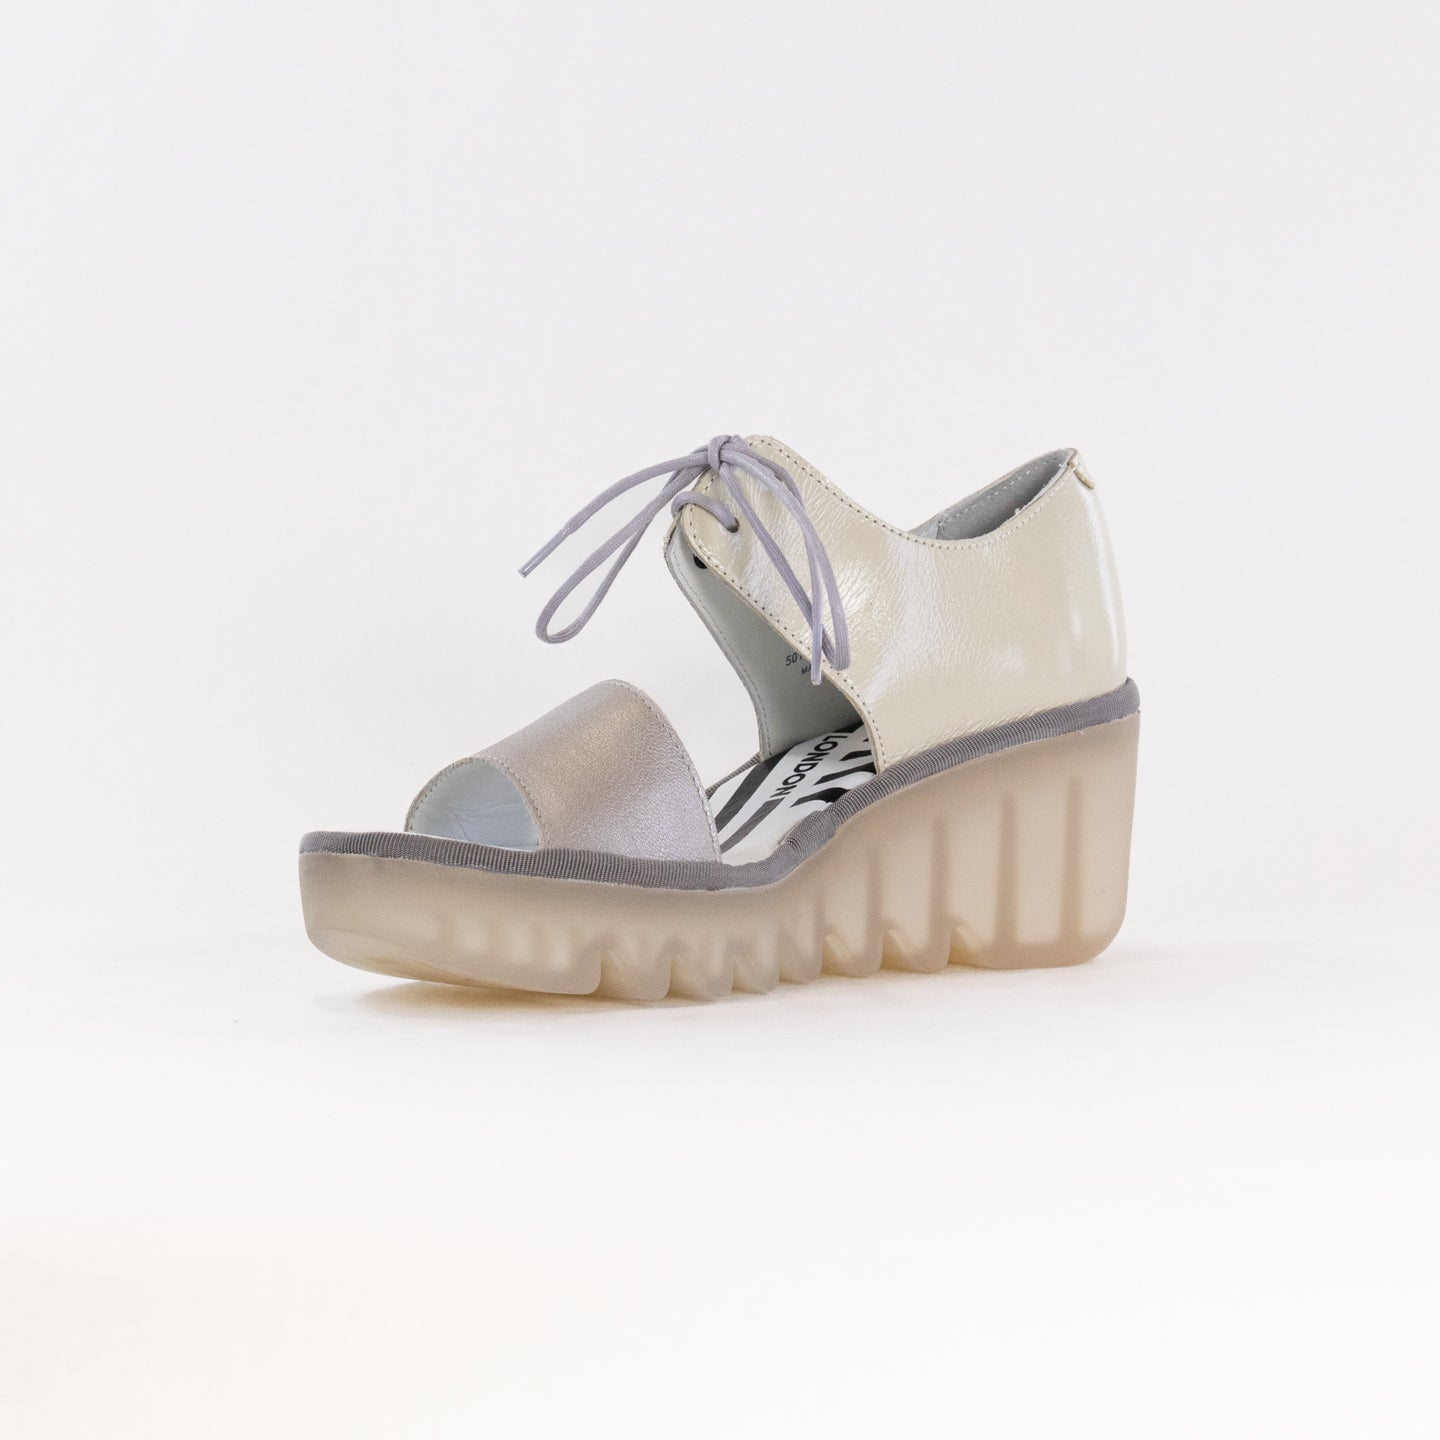 FLY London Crossover Sandals BILU465FLY (Women's) - Silver/Off White